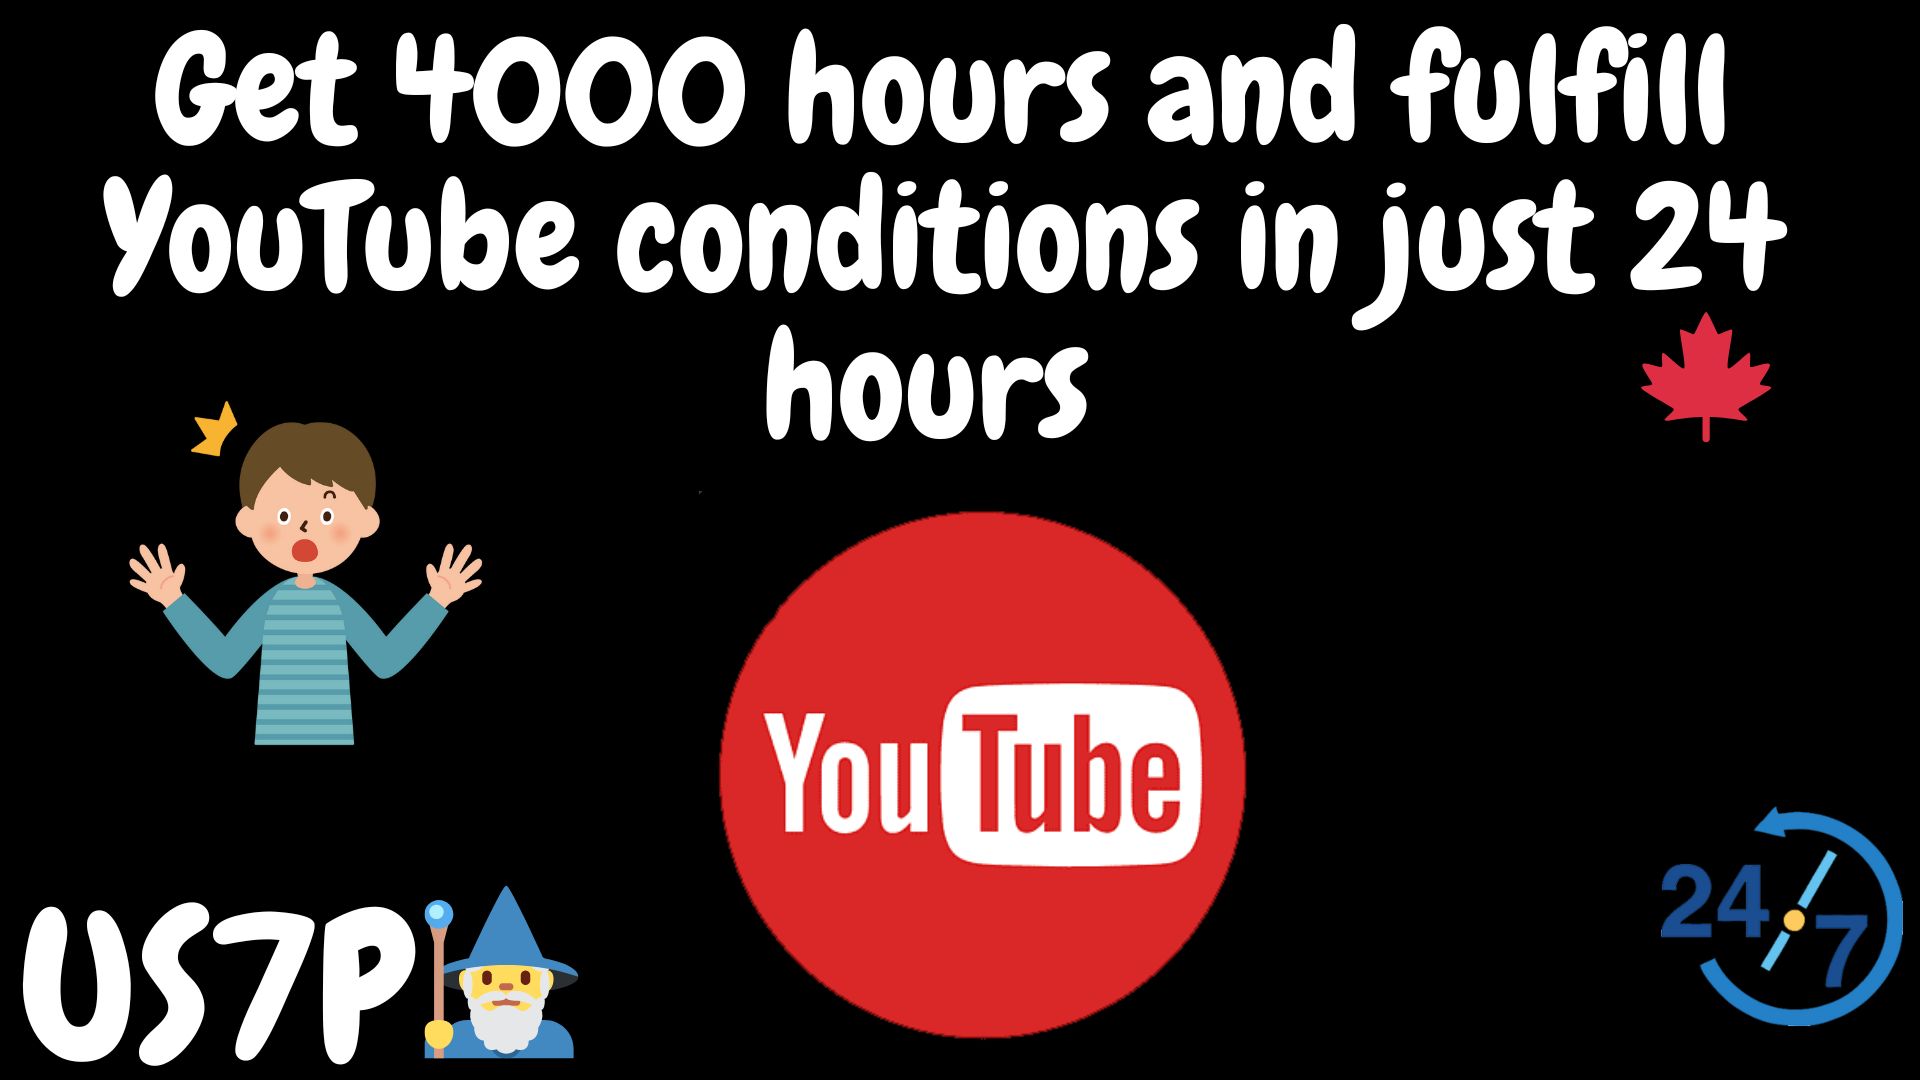 Get 4000 hours and fulfill youtube conditions in just 24 hours 